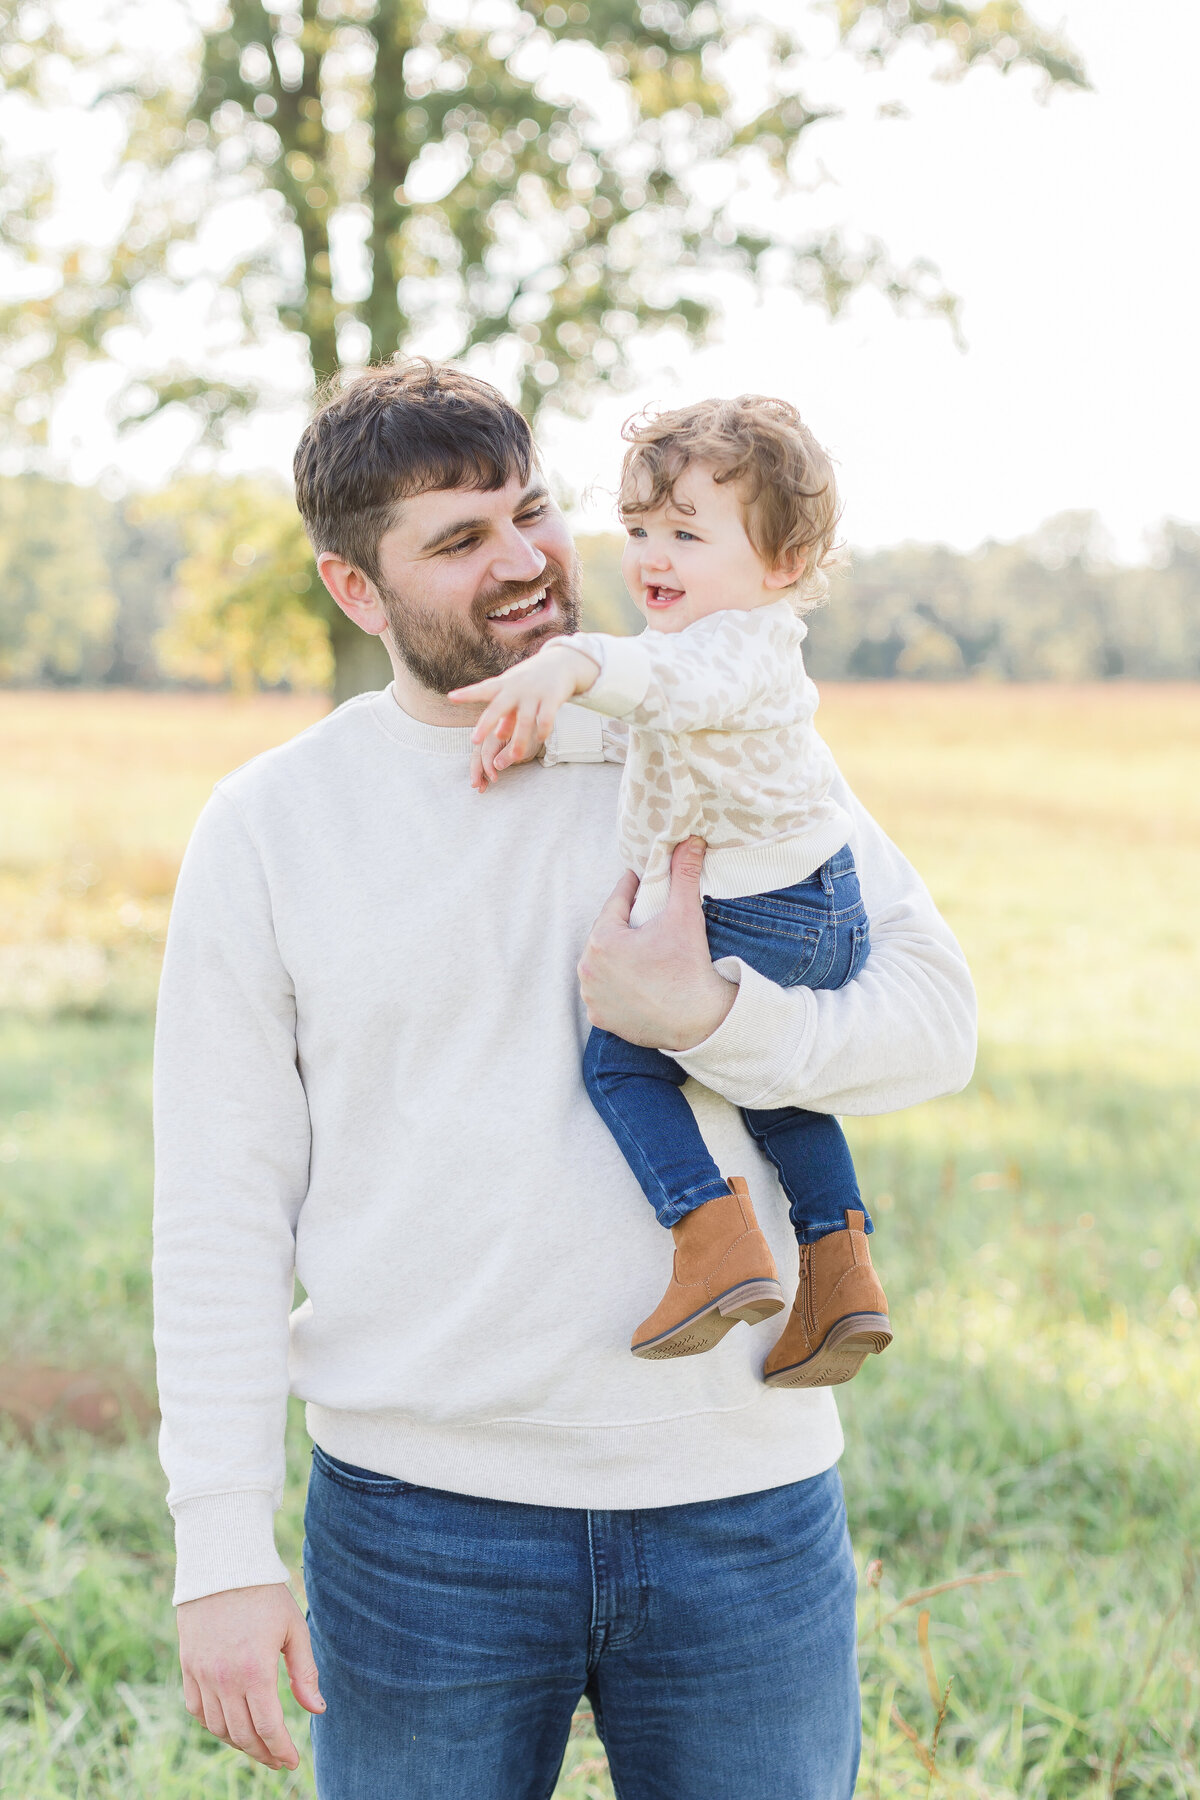 A Northern Virginia Family Photographer photo of a  father holding his smiling daughter outside in a field